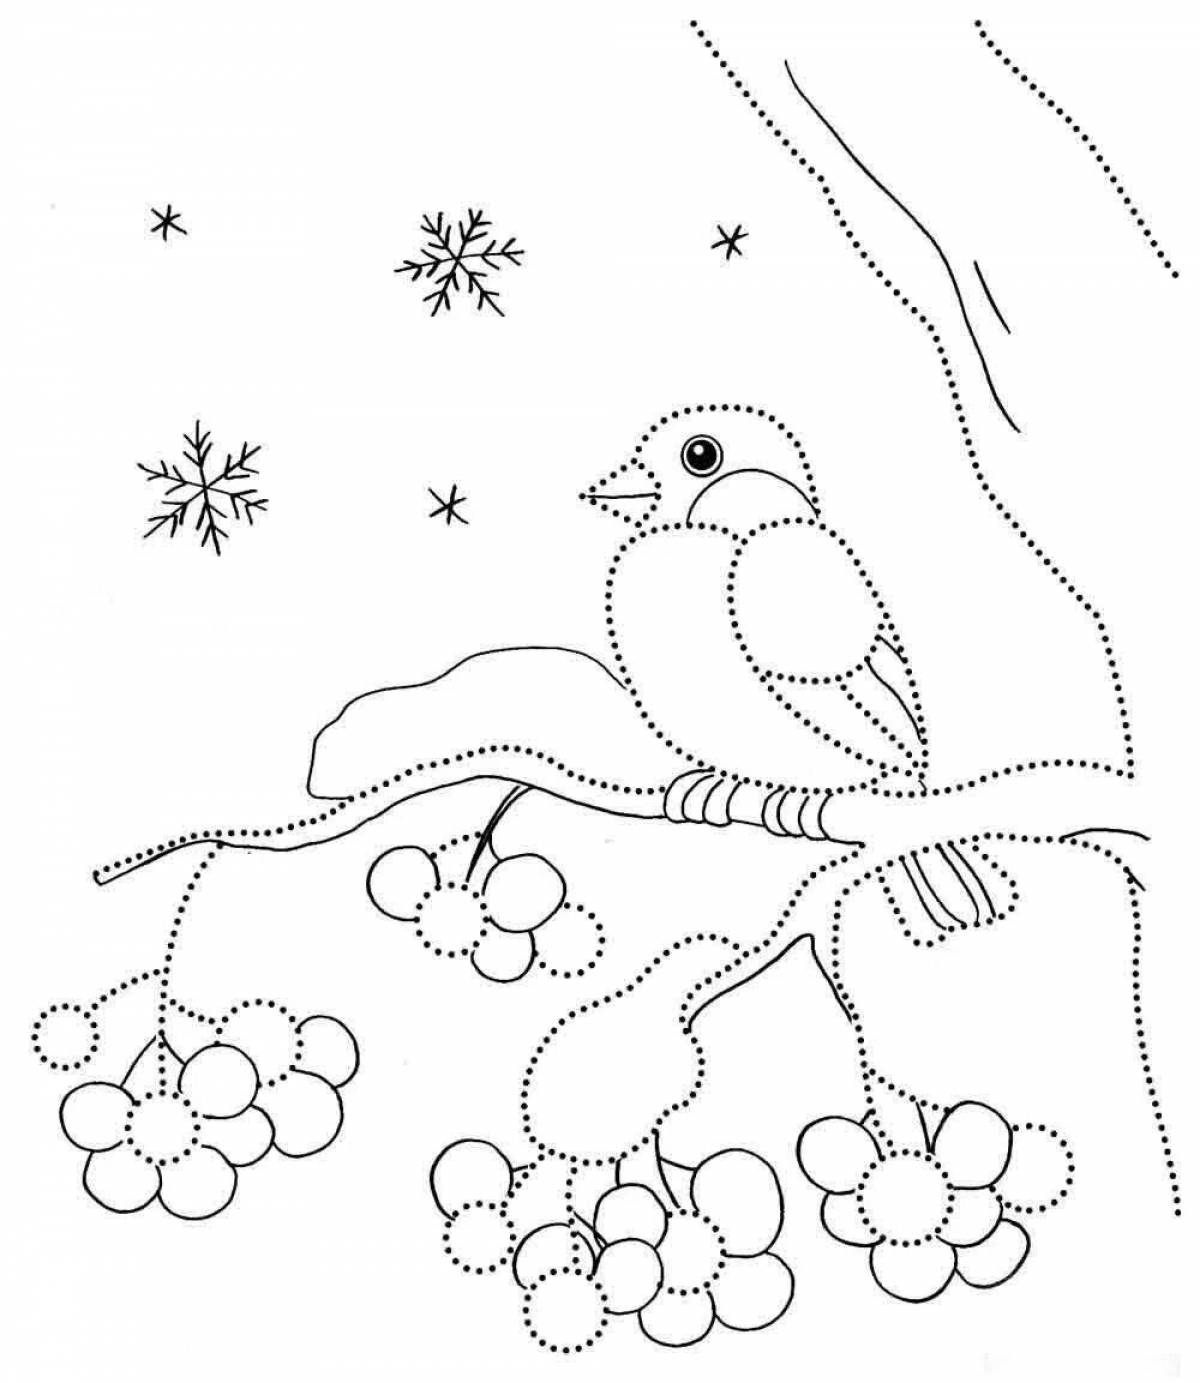 Coloring book fluttering birds on a branch in winter